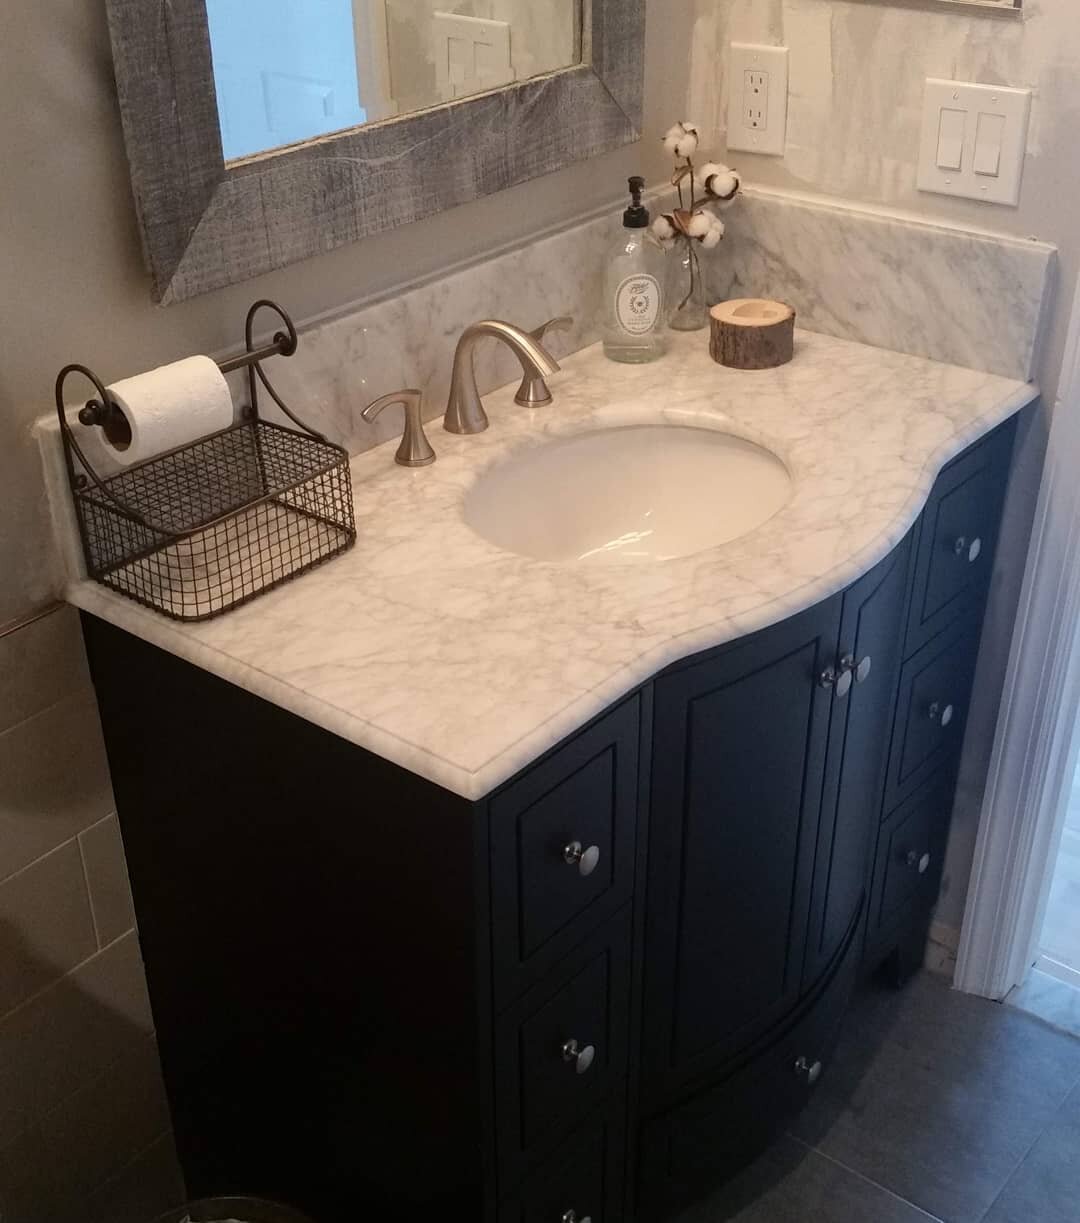 This was the third vanity. I guess they are right when they say the third time is a charm. First one was damaged on the initial install by another contractor, second one was damaged straight out of the box. 
#triplerhomeservices #qualitycraftsmanship